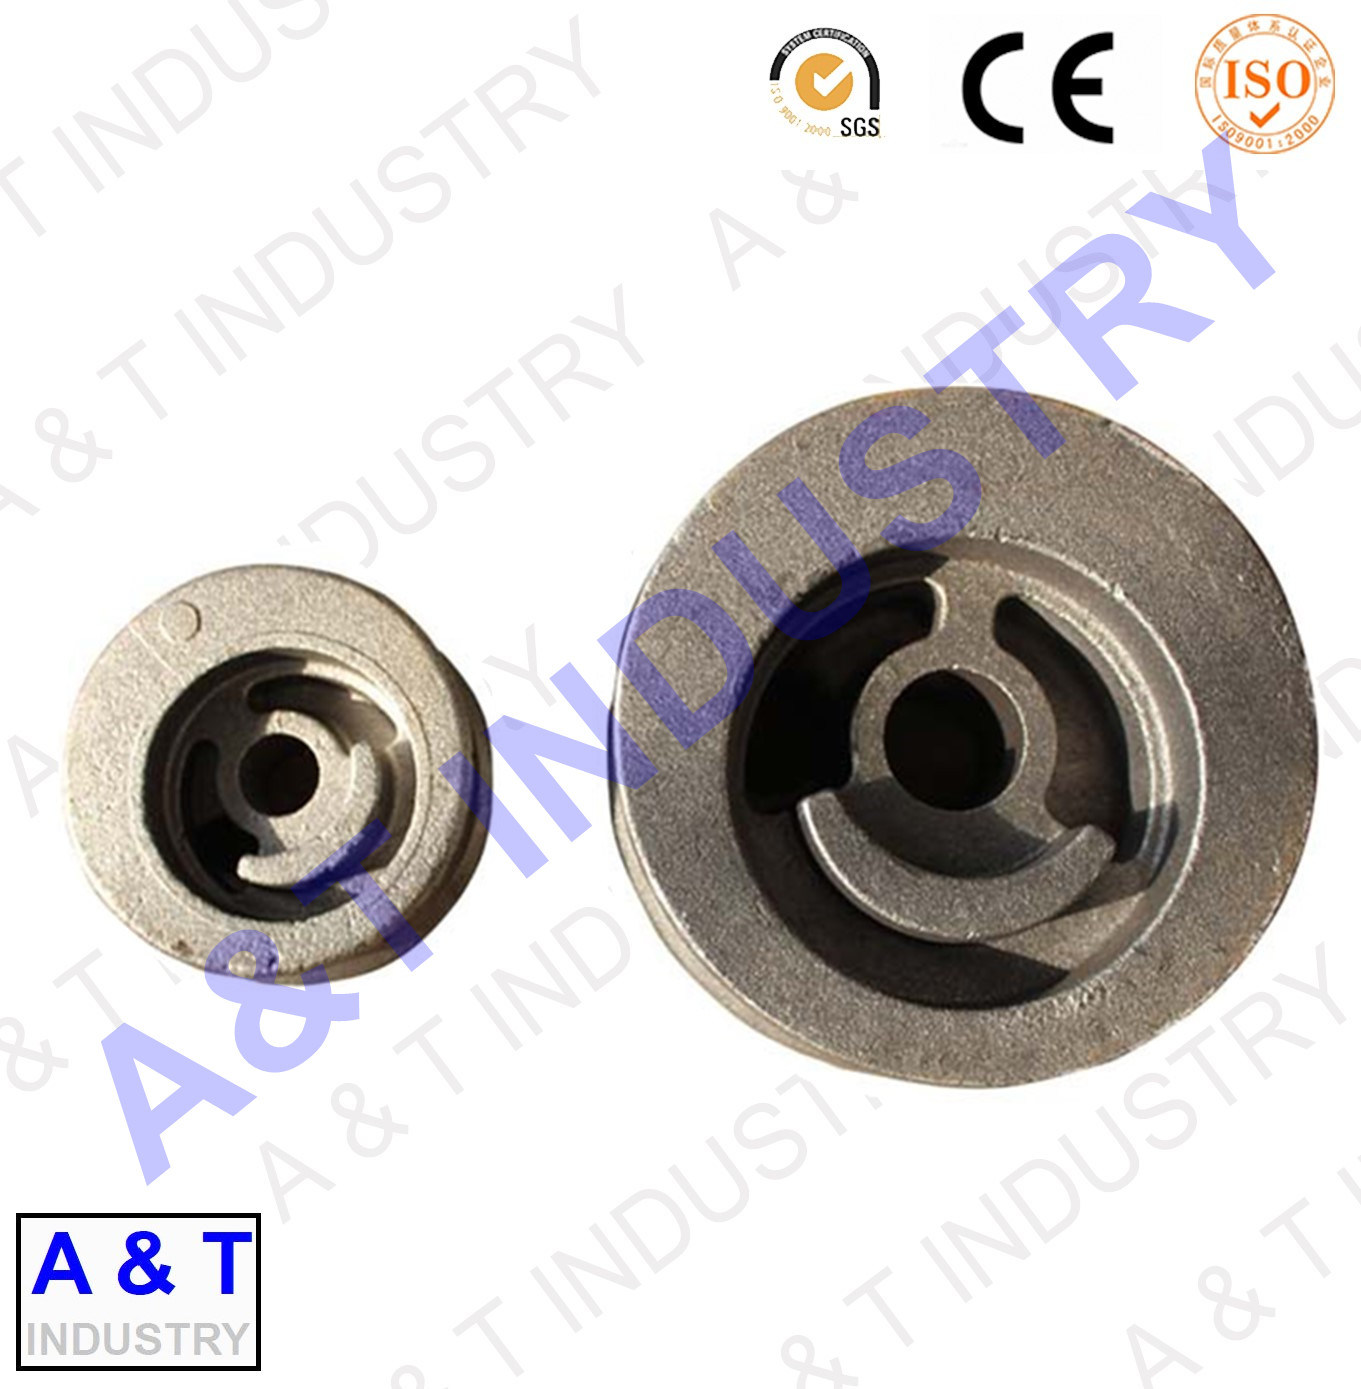 OEM Aluminum Die Casting Part with 13 Years Experience